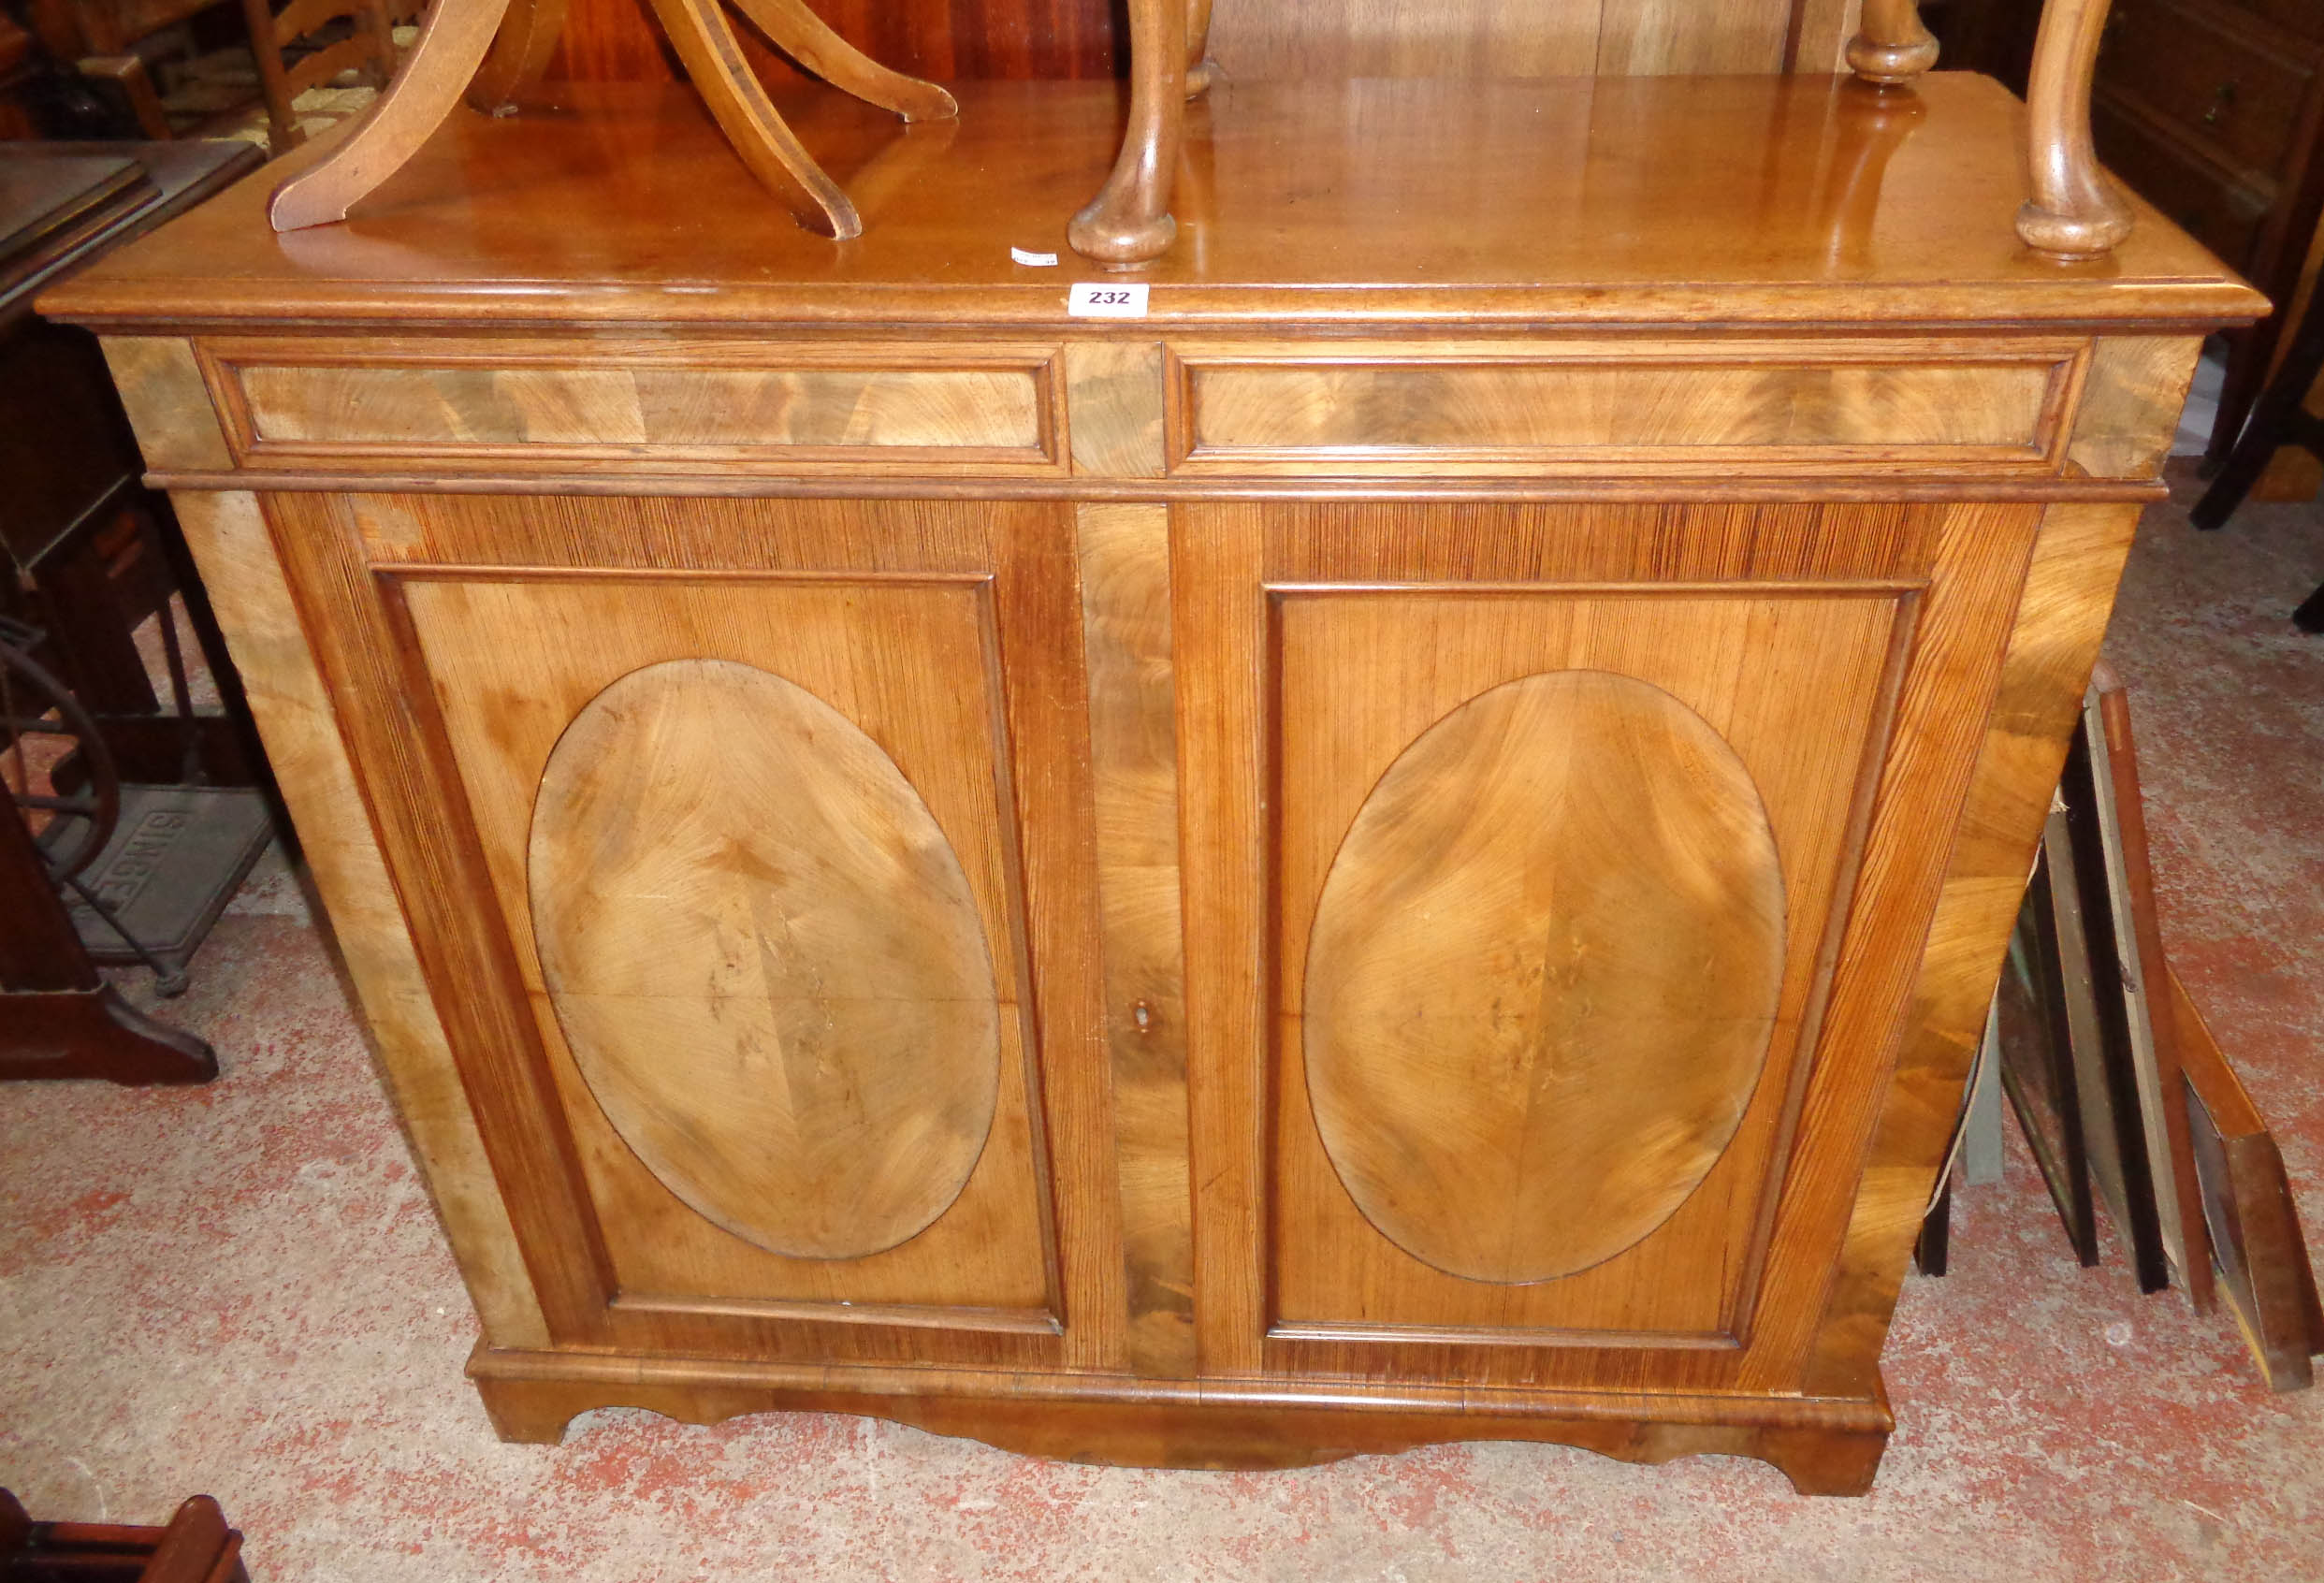 A 3' 7 1/2" mahogany and mixed wood chiffonier with two secret frieze drawers and pair of oval